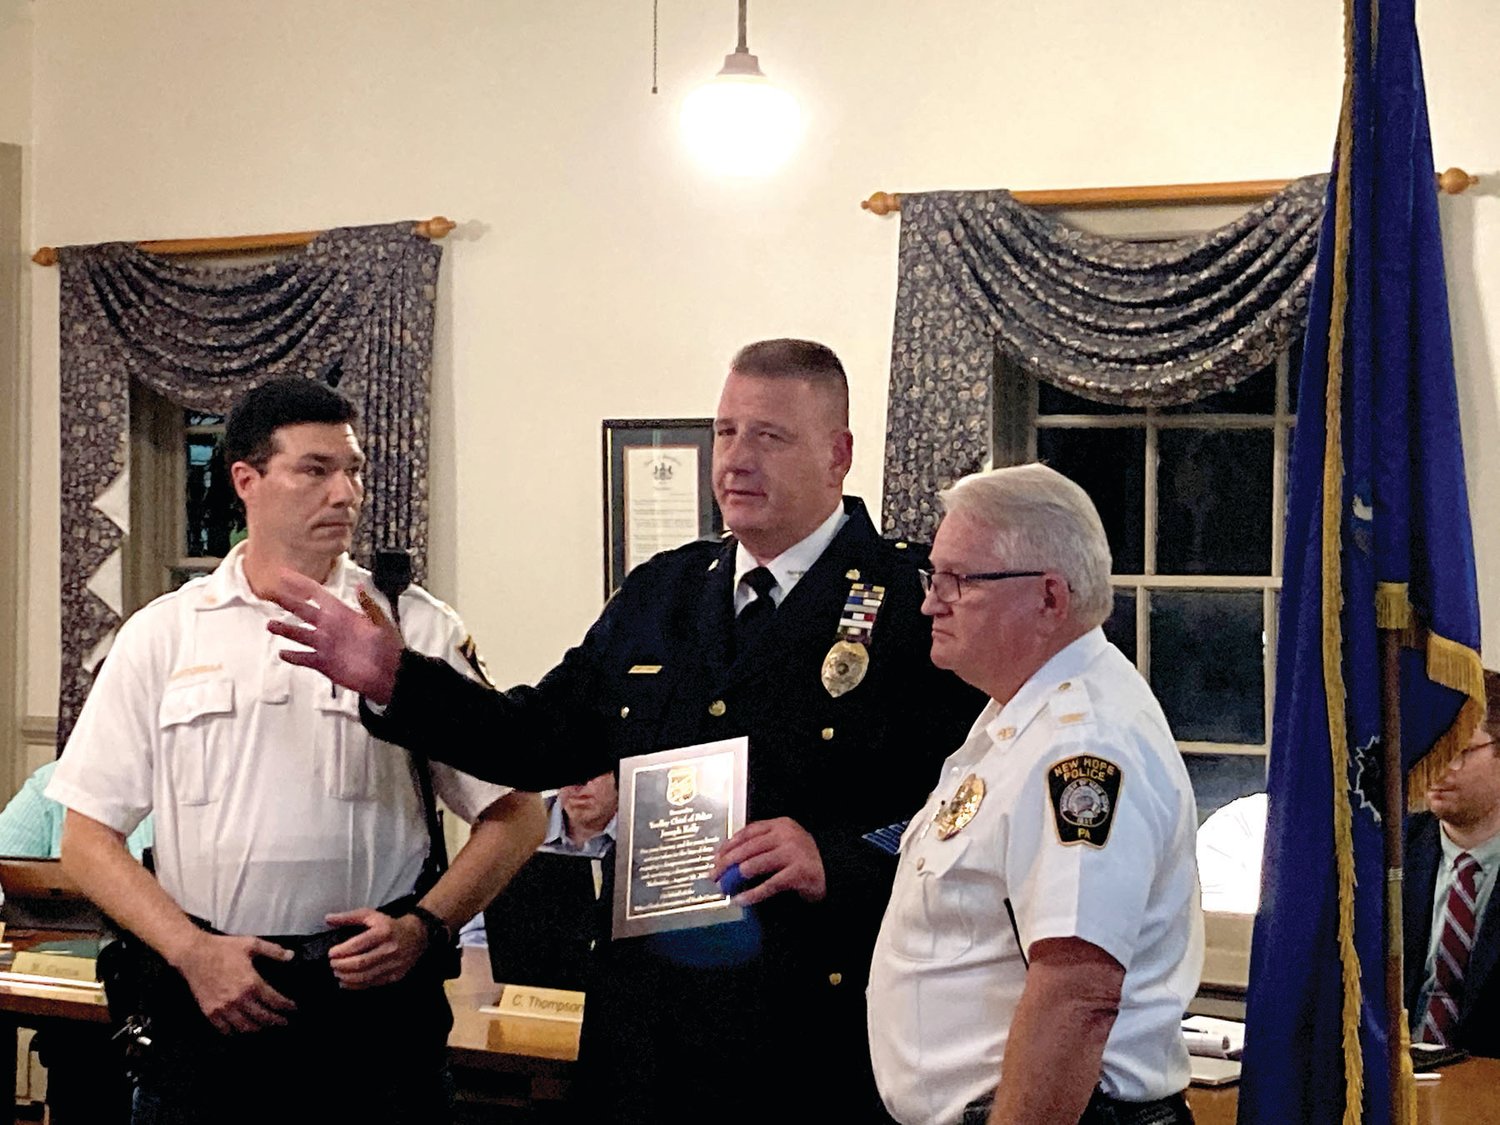 Yardley Borough Police Chief Joseph D. Kelly III, center, accepts an award at the Oct. 19 council meeting presented by Police Chiefs Association of Bucks County President and New Hope Borough Police Chief Mike Cummings, right, and Middletown Township Police Chief Joseph Bartorilla.